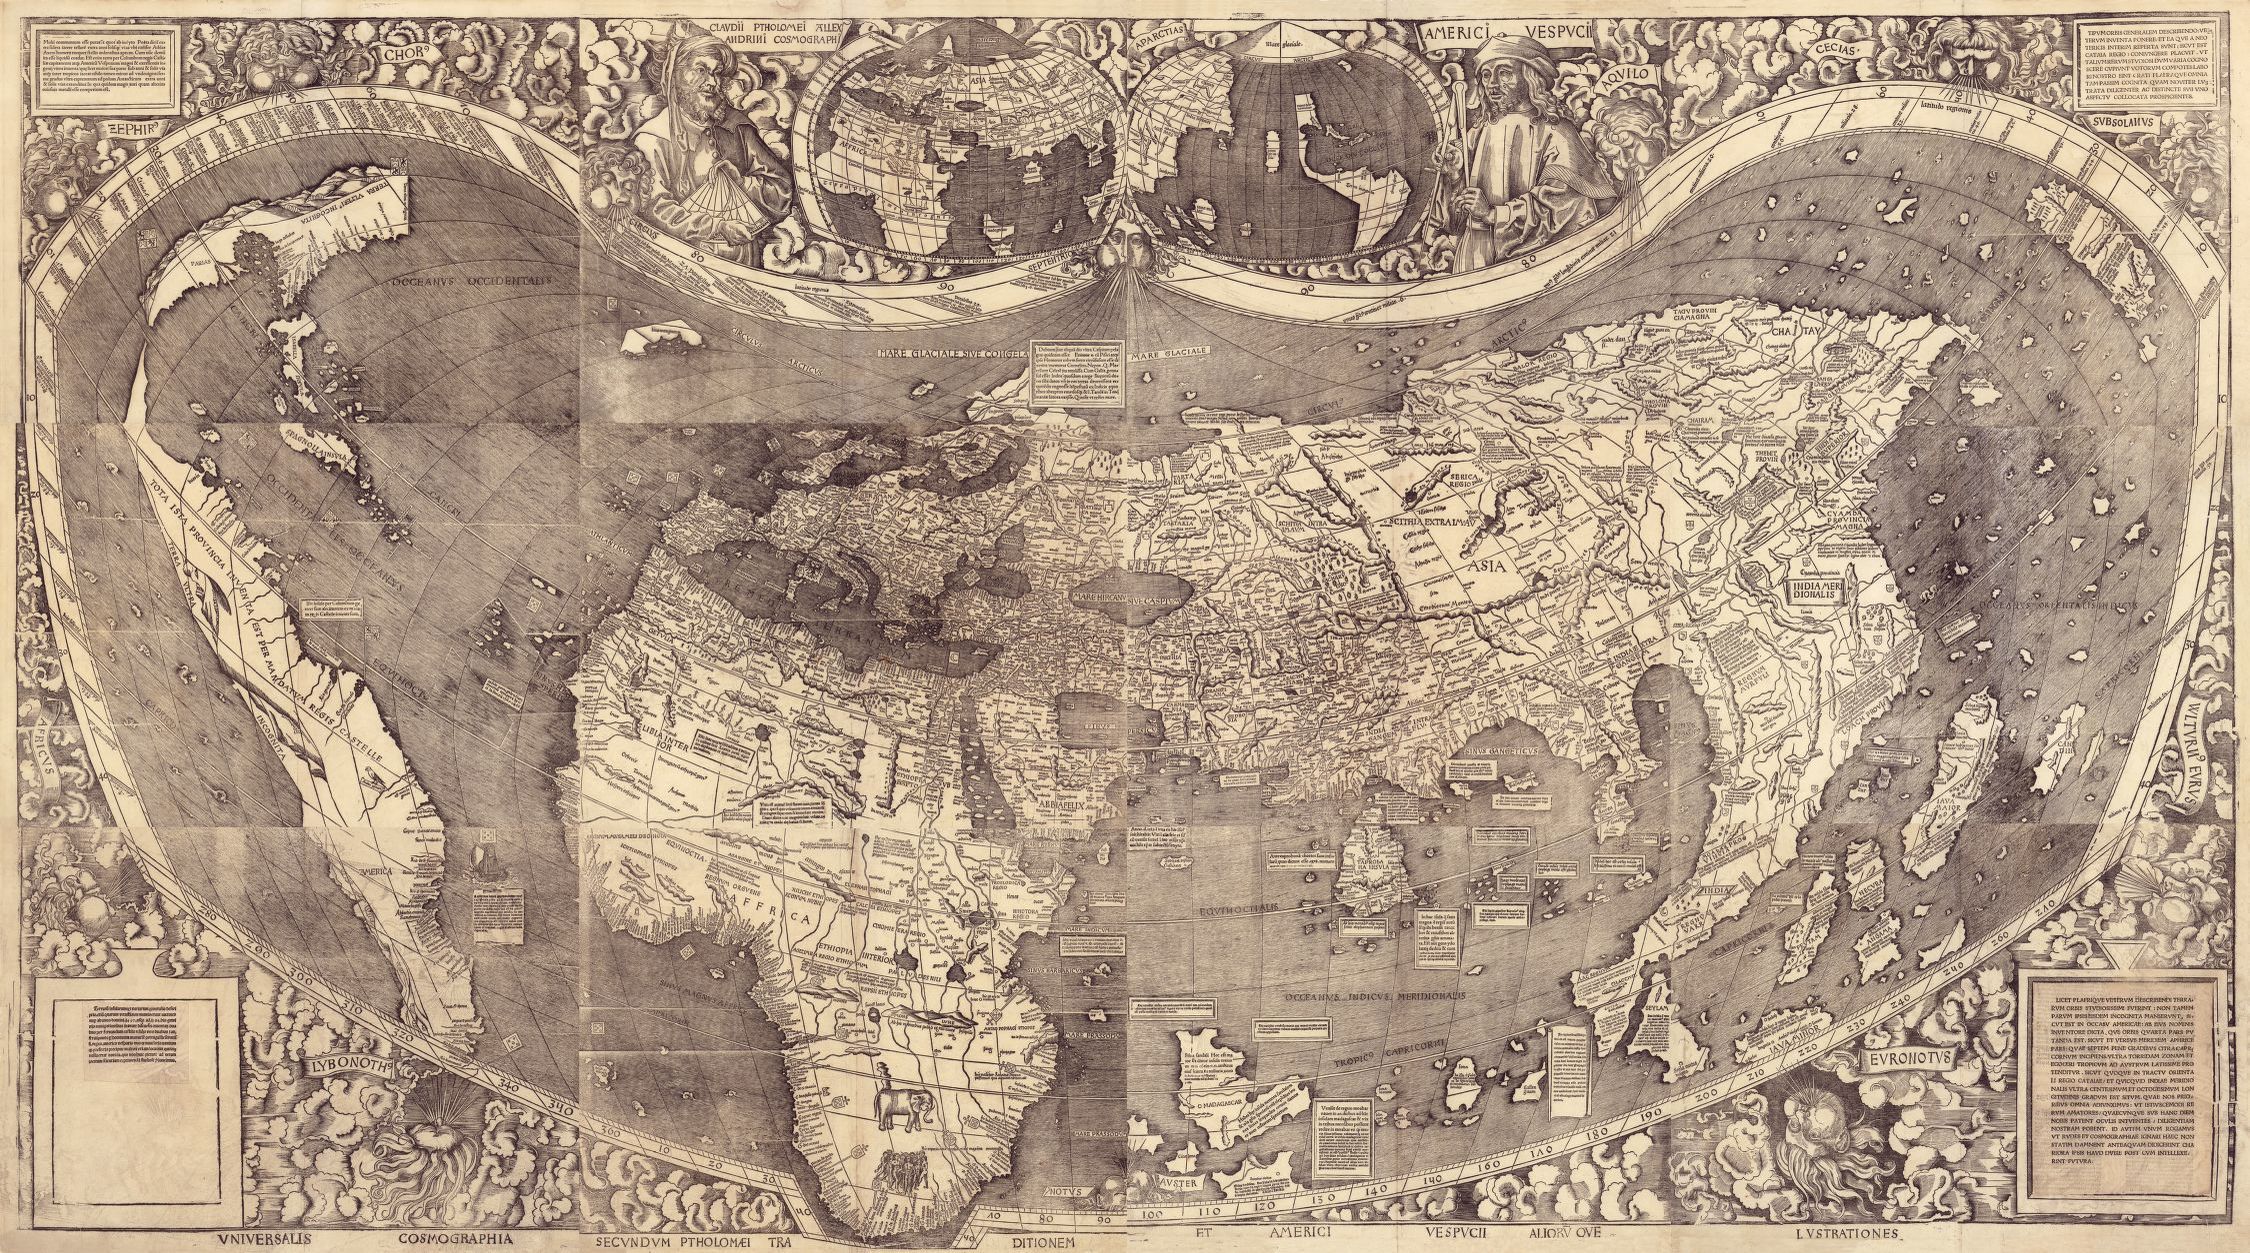 1507 wall map depicting America, Africa, Europe, Asia, and the Oceanus Orientalis Indicus separating Asia from the Americas